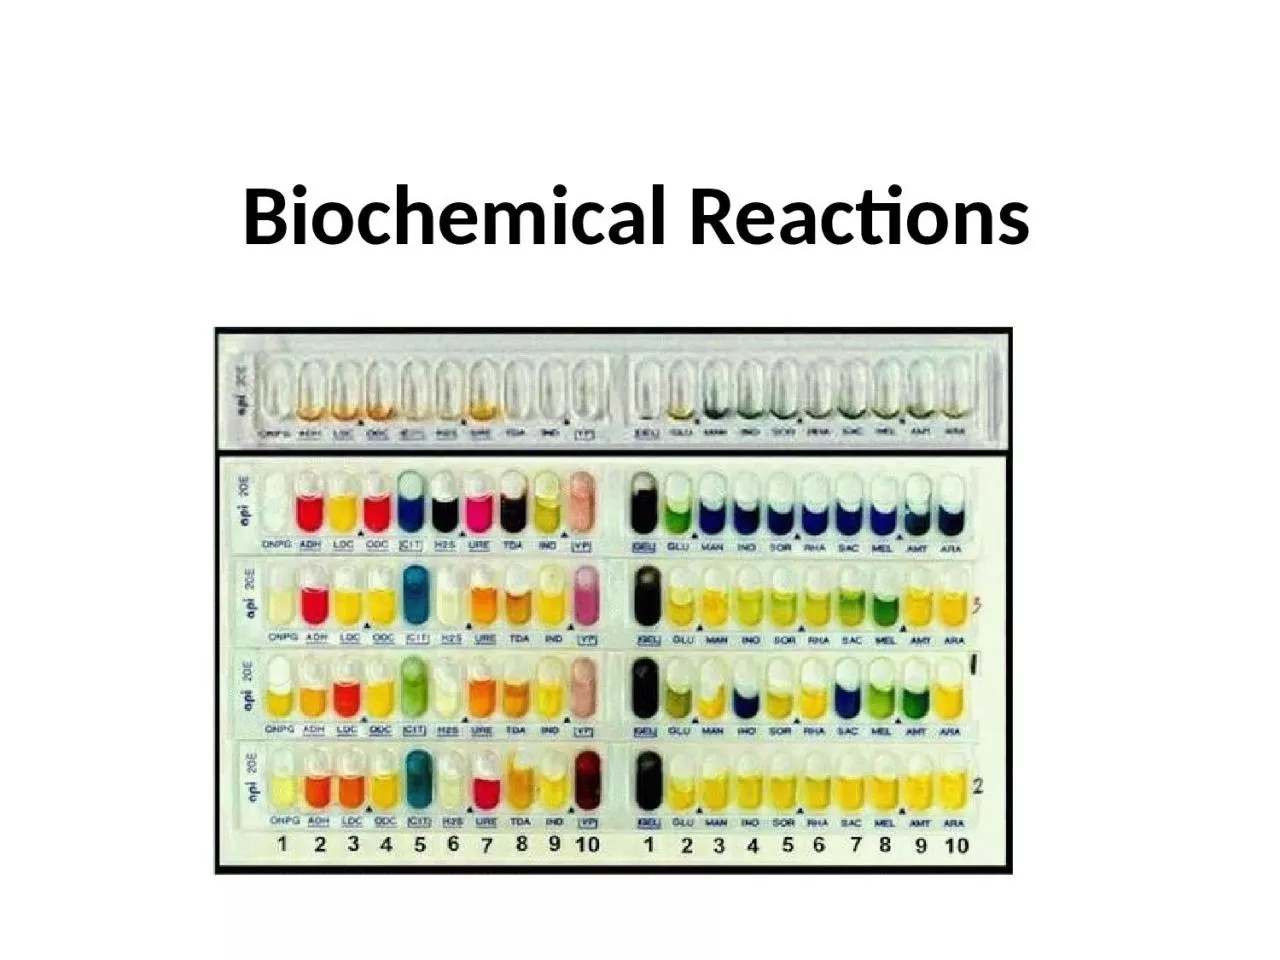 Biochemical Reactions Catalase Test: